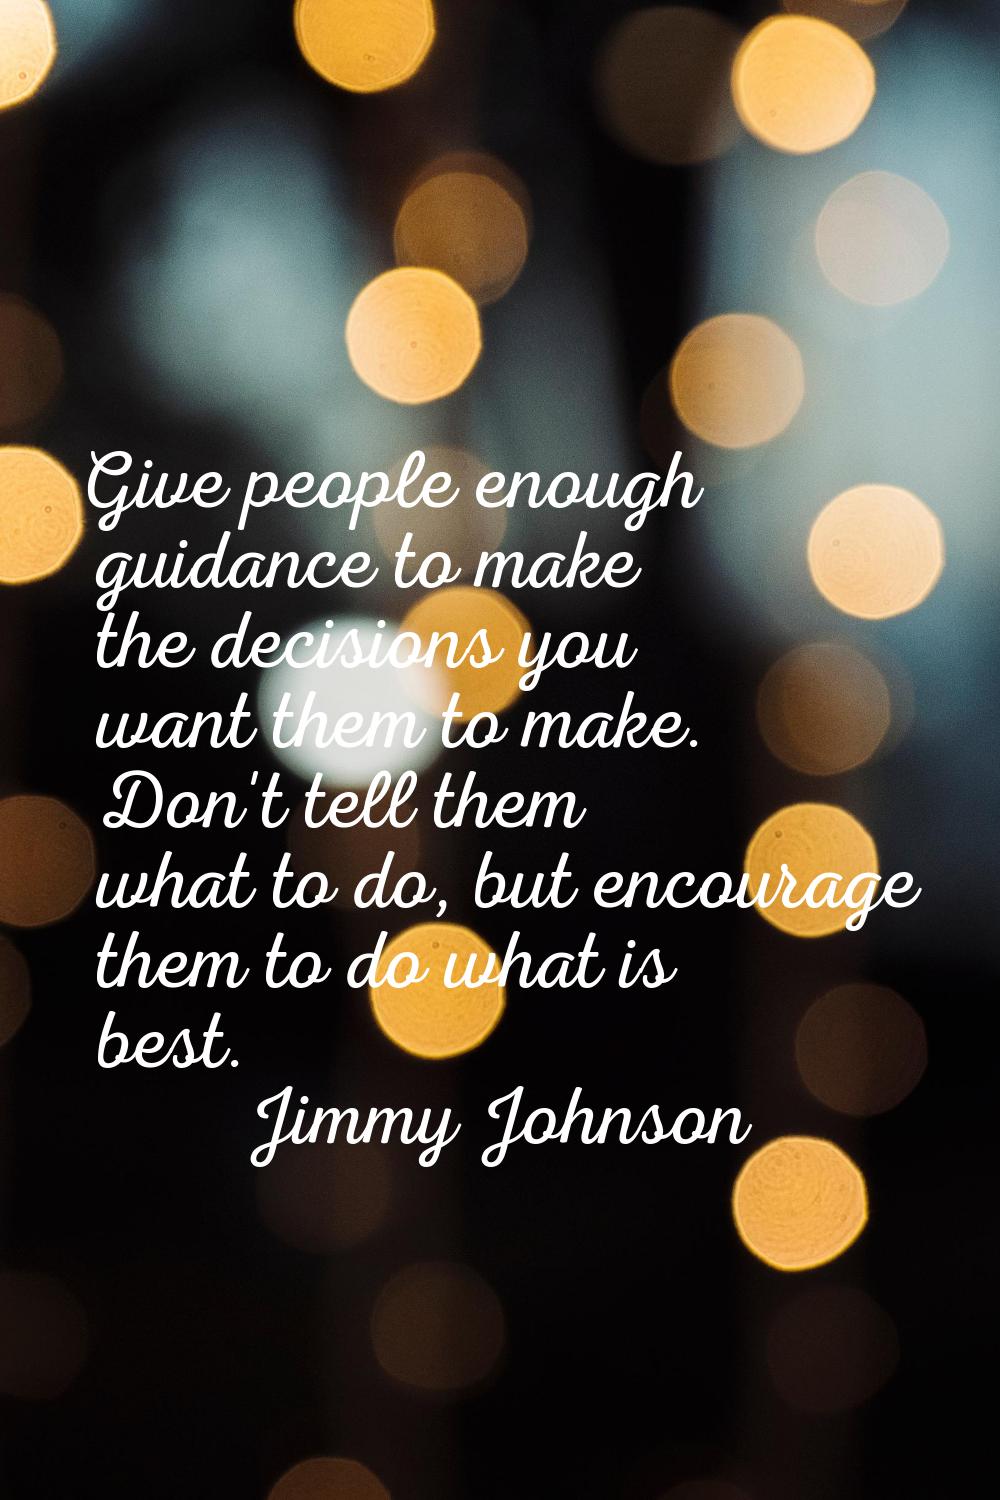 Give people enough guidance to make the decisions you want them to make. Don't tell them what to do